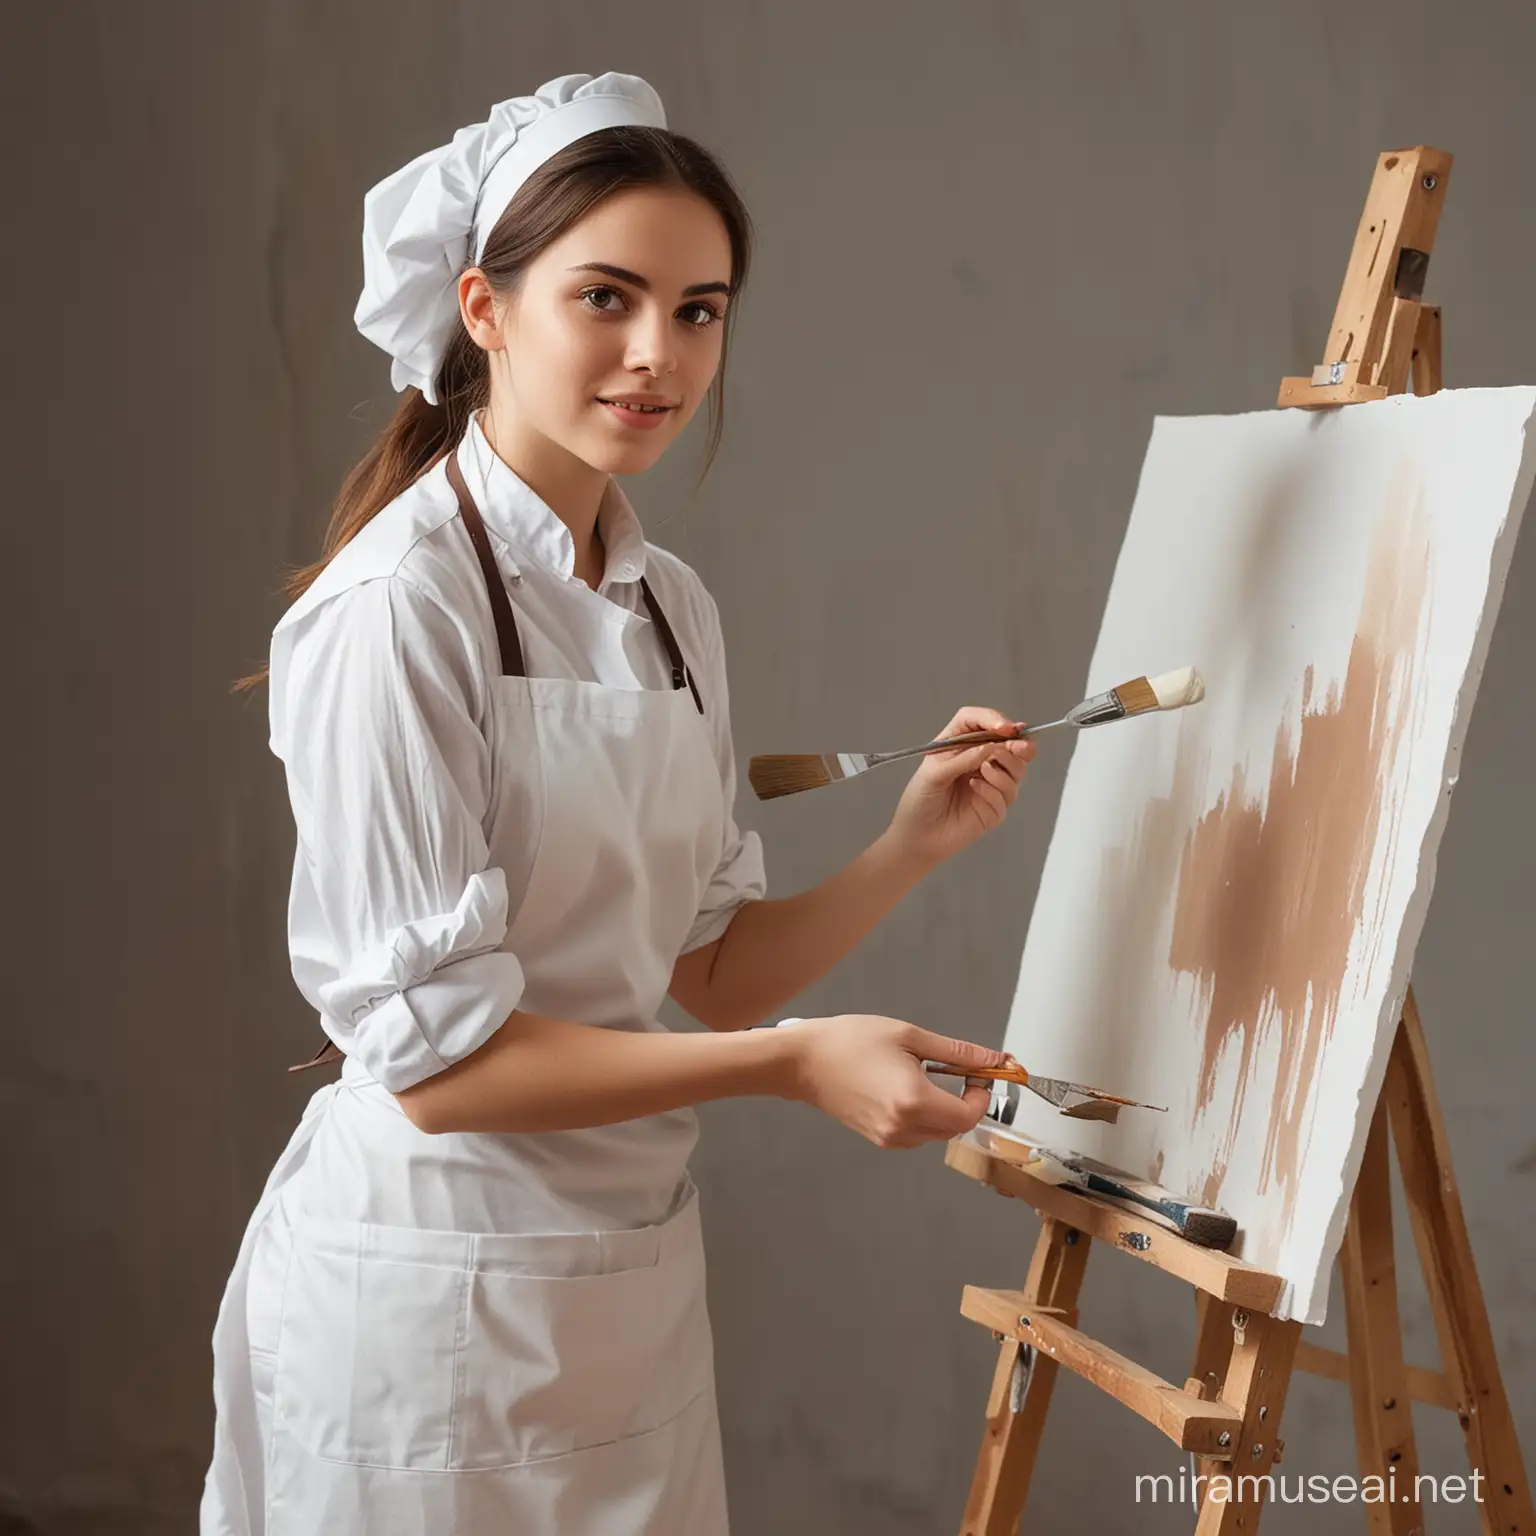 young artis with white apron, painting, looking the canvas